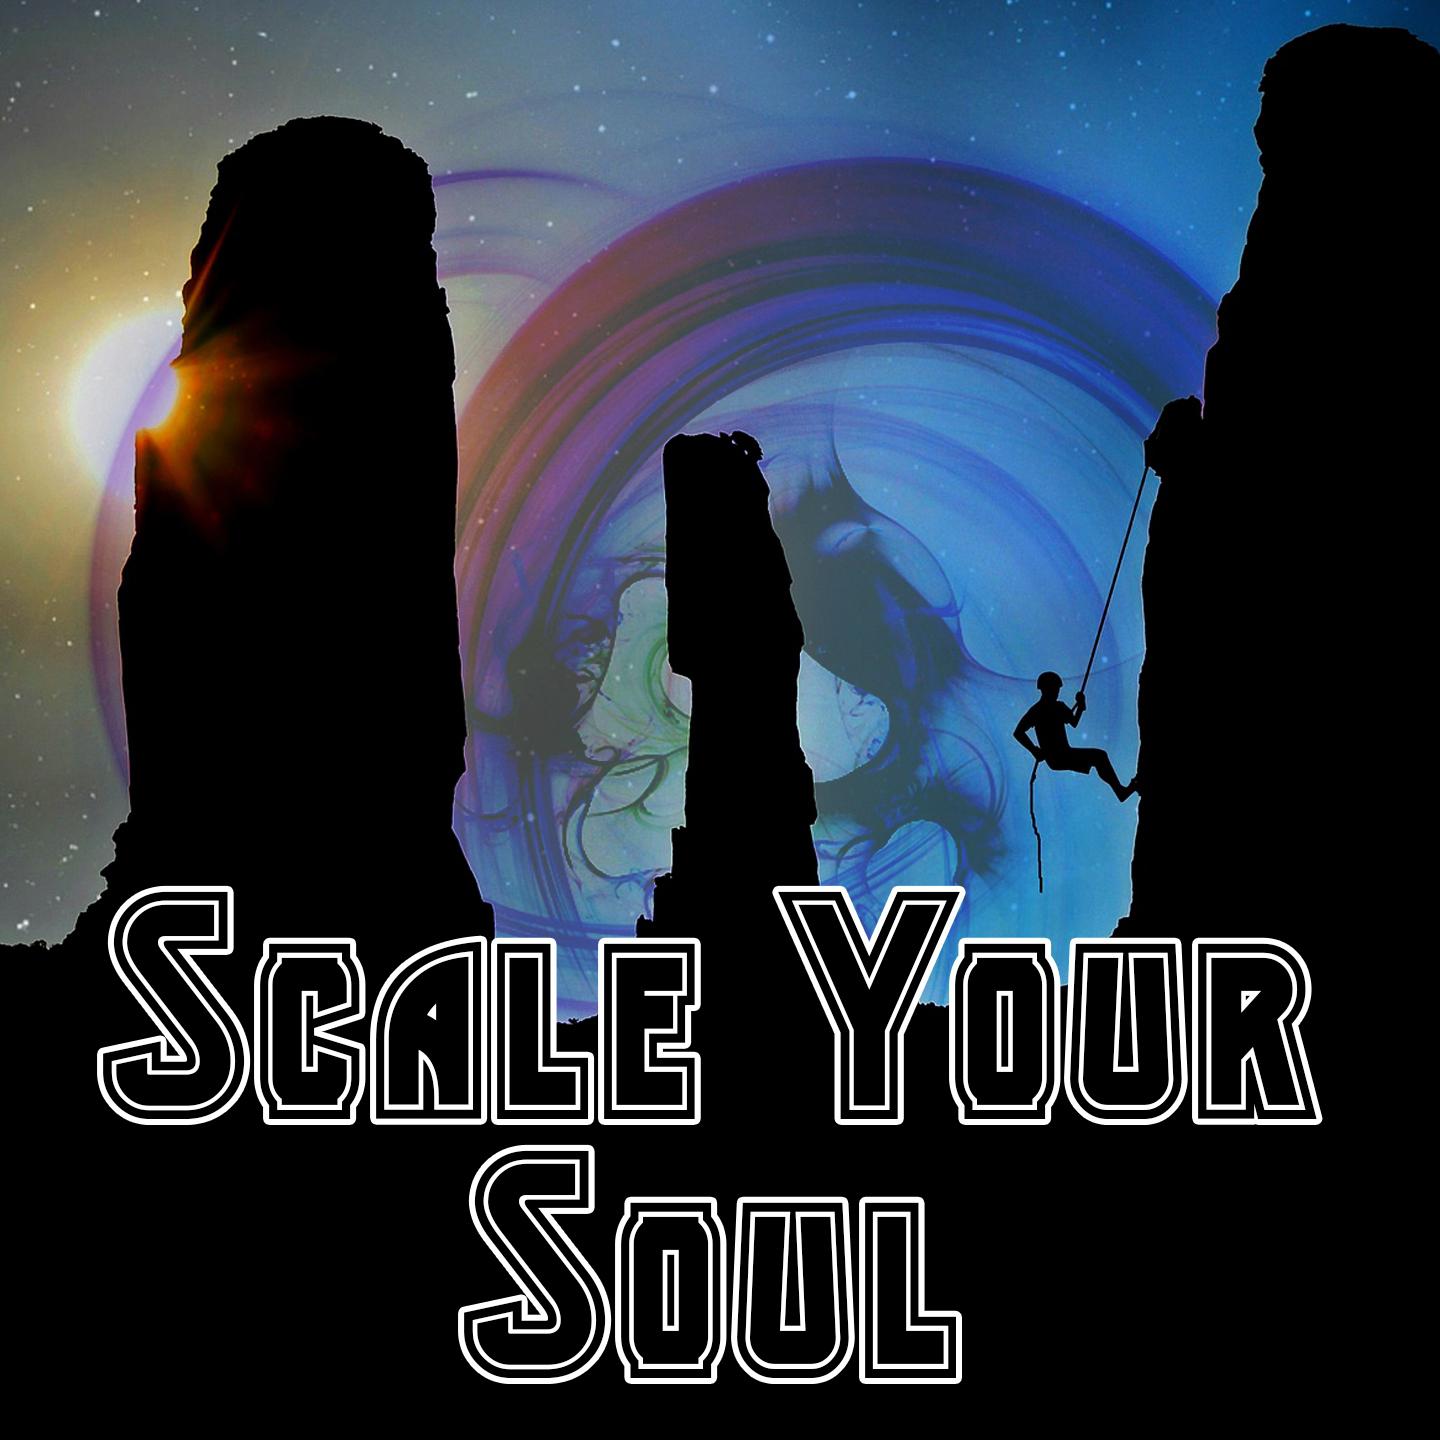 Scale Your Soul